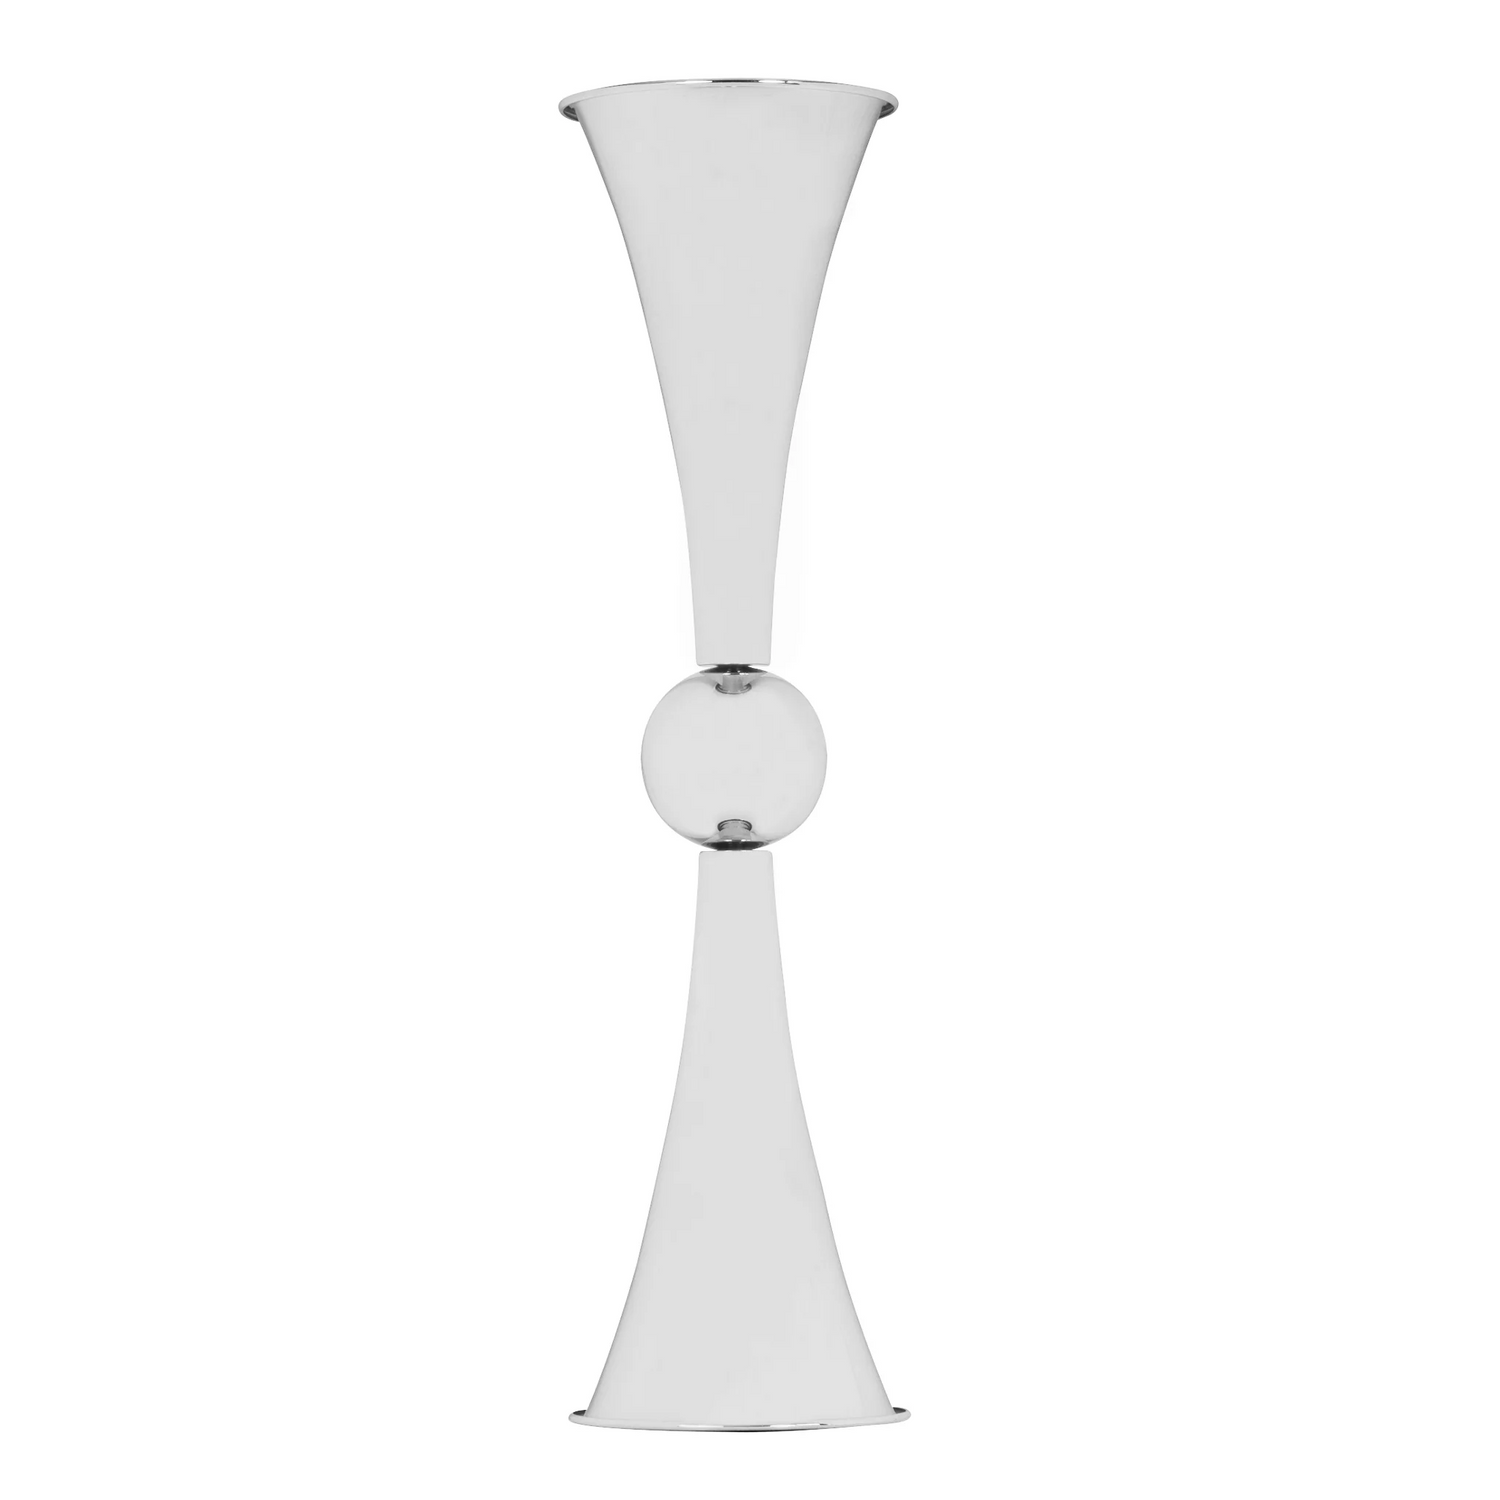 This beautiful 28-inch silver vase is perfect as a wedding table decoration. It&